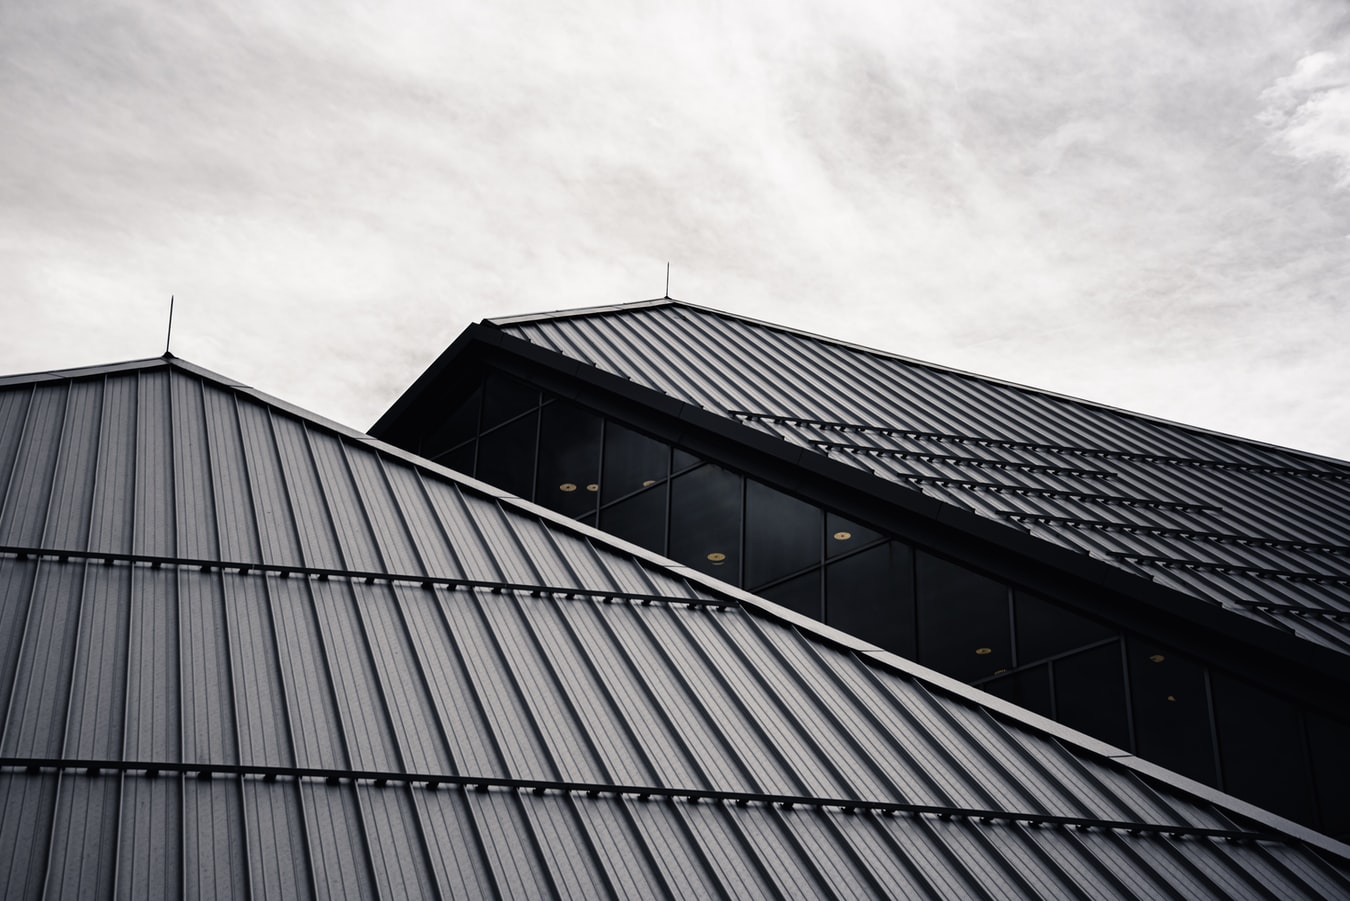 The need to hire a professional metal roofing installer